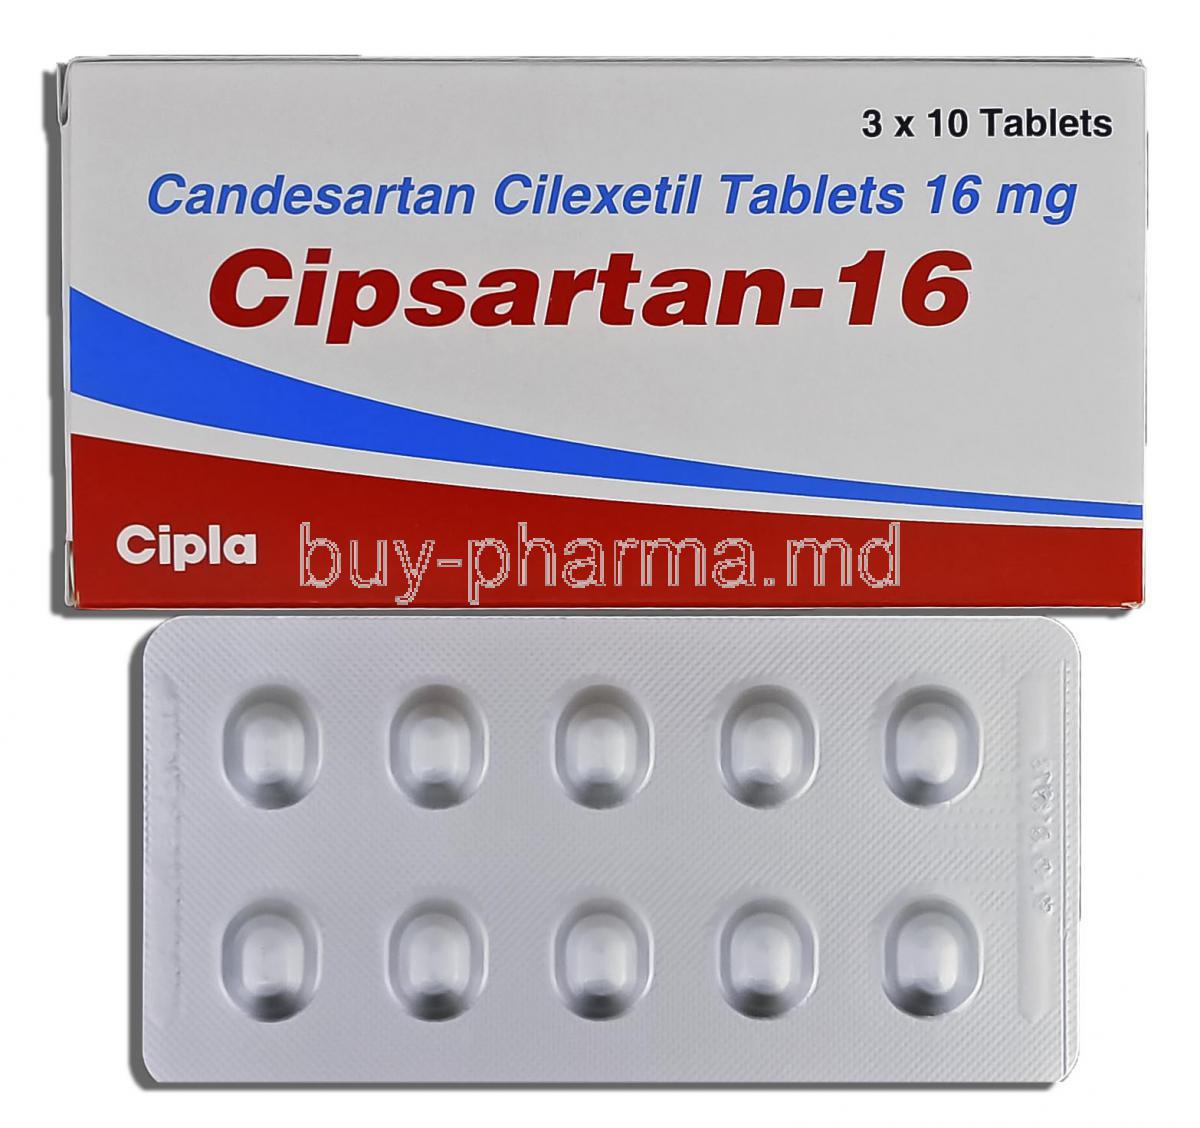 what is candesartan cilexetil 16 mg used for